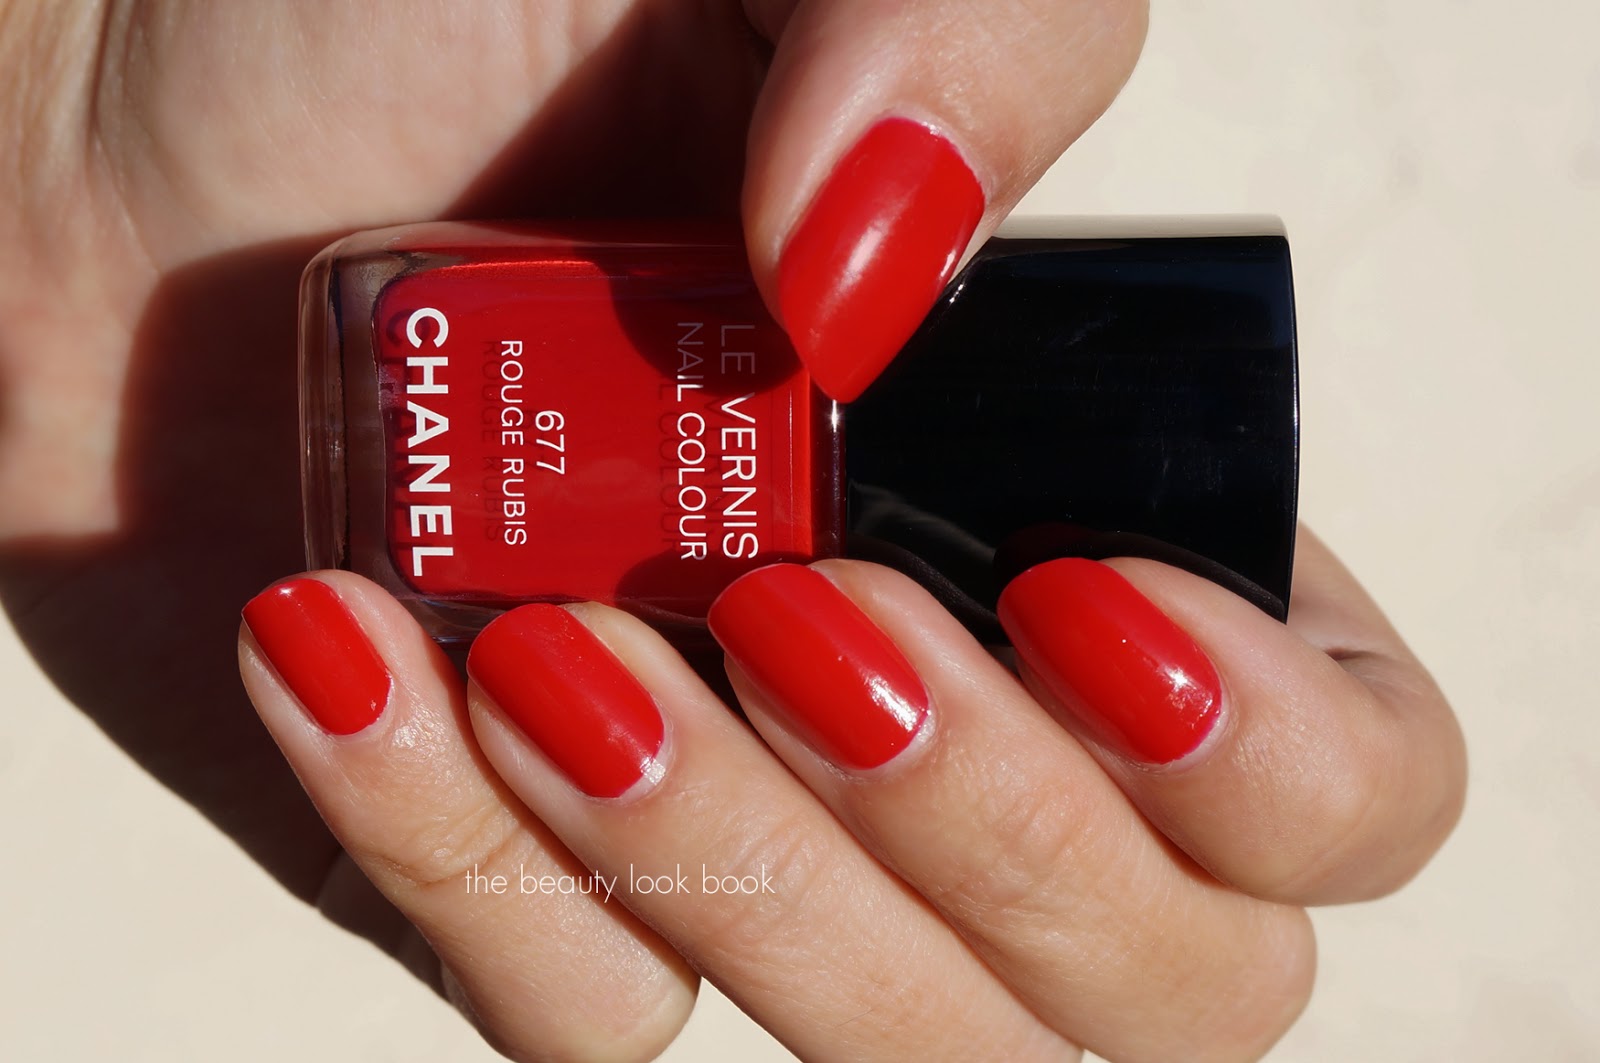 Chanel Le Vernis Holiday 2022 Review: We Swatched The Shades & They Are  Stunning